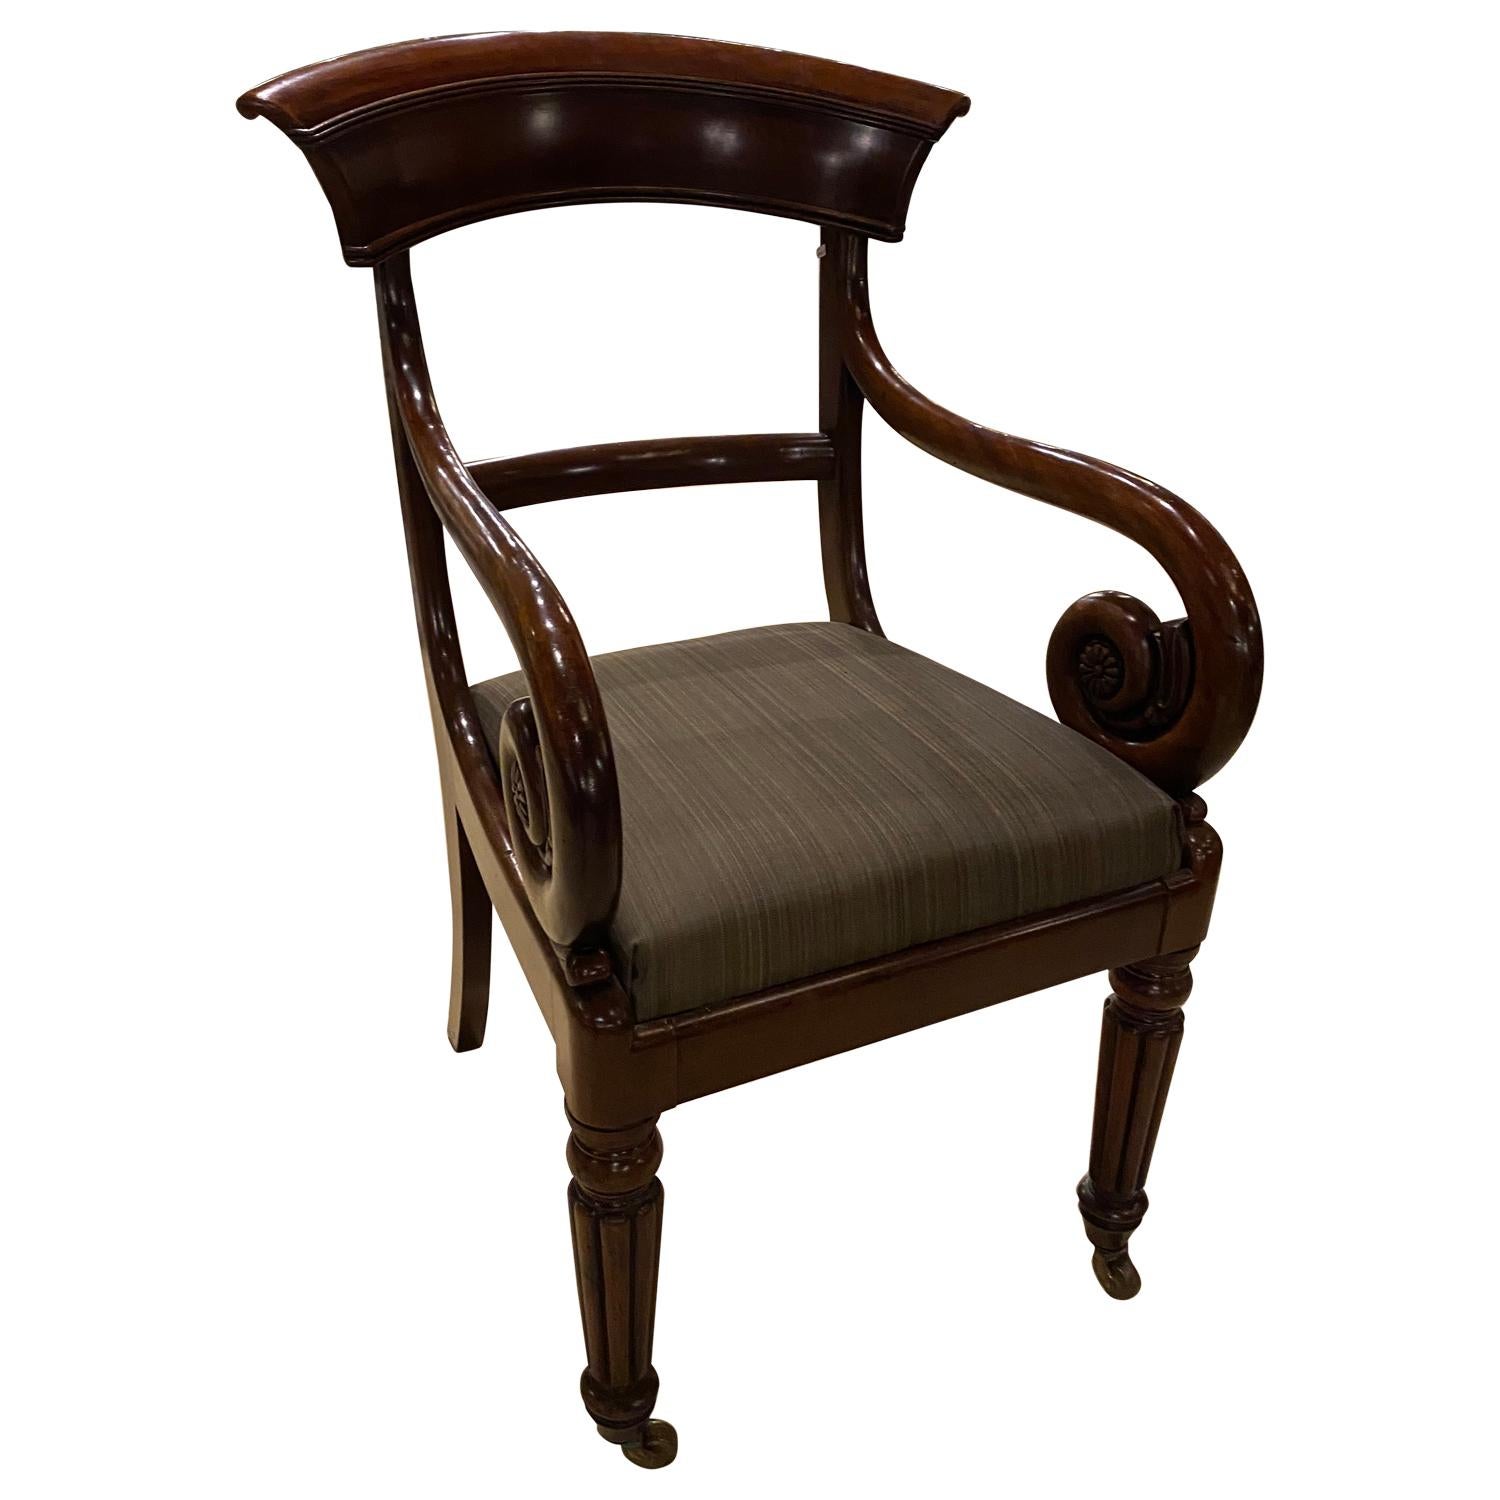 19th Century Regency  Arm Chair with Scrolled Arms, English